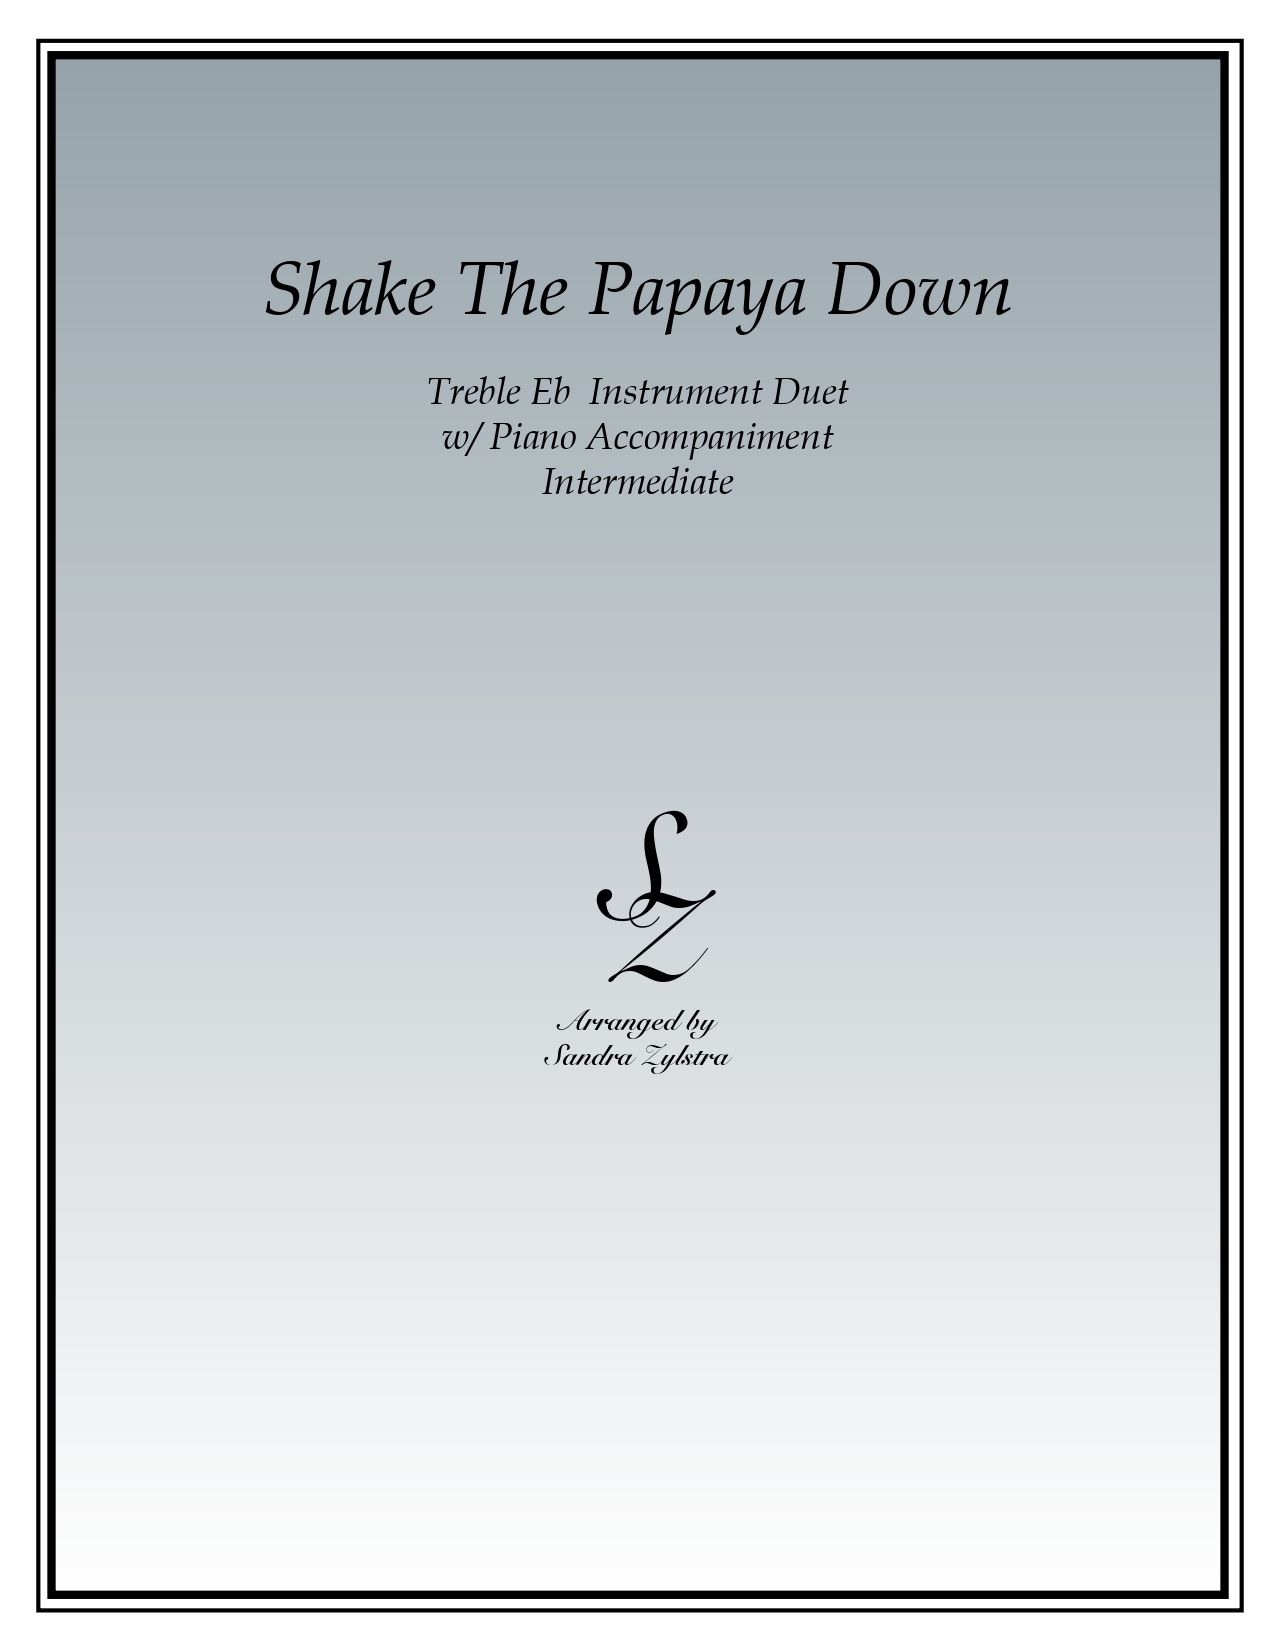 Shake The Papaya Down Eb instrument duet part cover page 00011